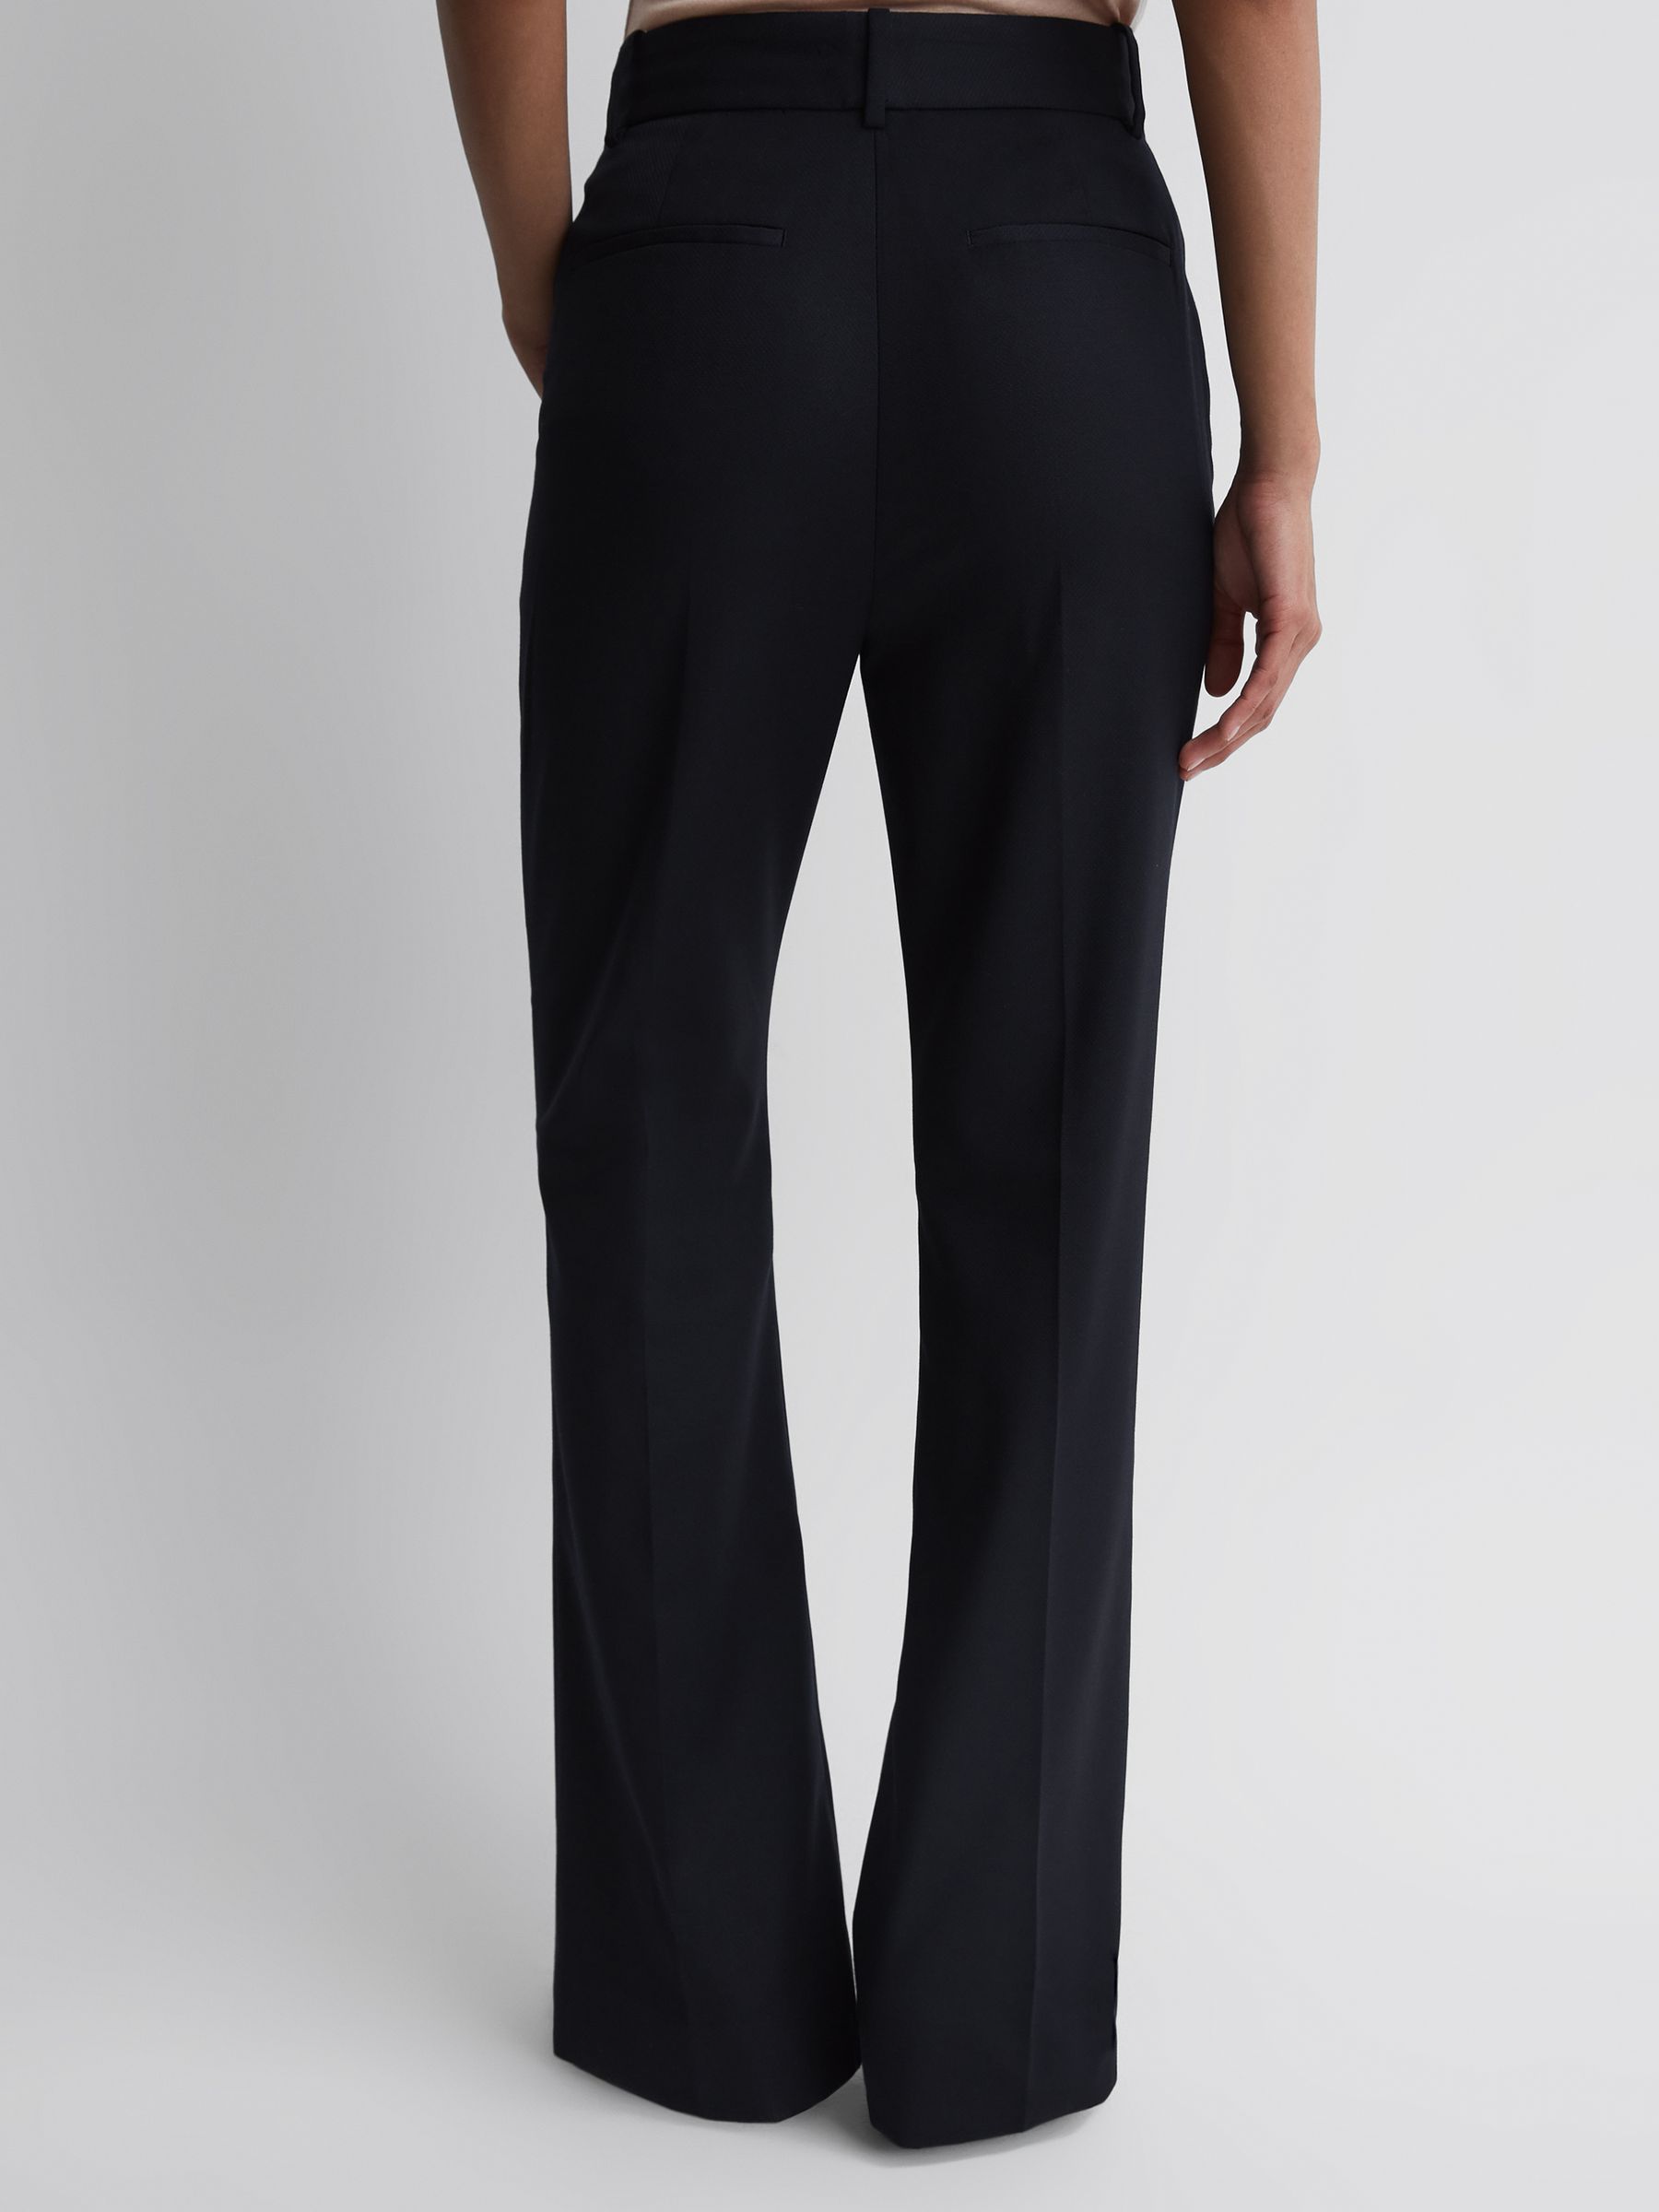 Reiss Haisley Tailored Flare Trousers - REISS